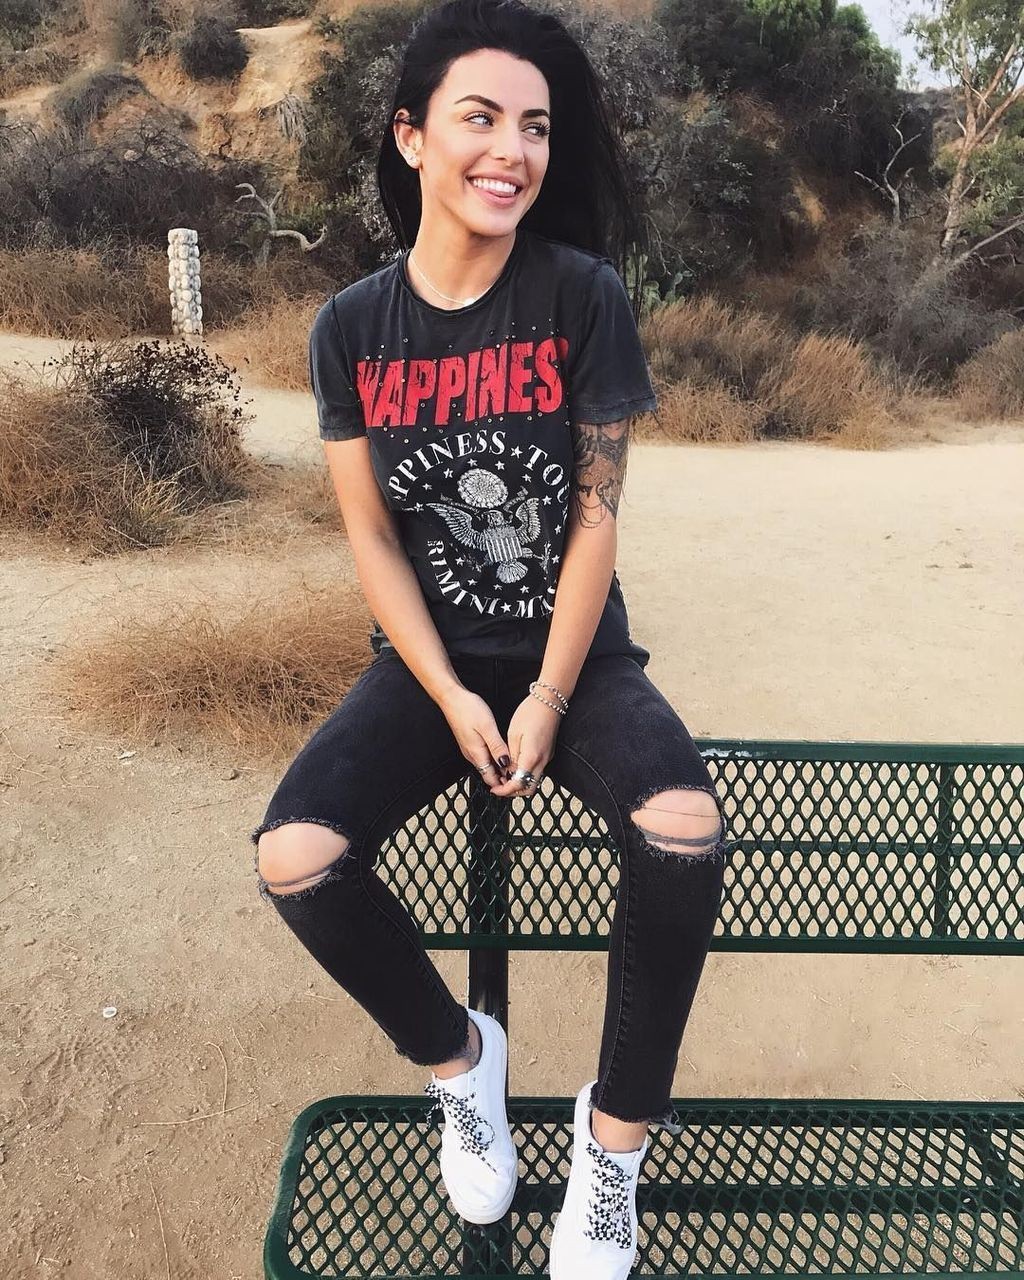 Really cute and adorable instagram kylie rae: Kylie Jenner,  Tomboy Outfit  